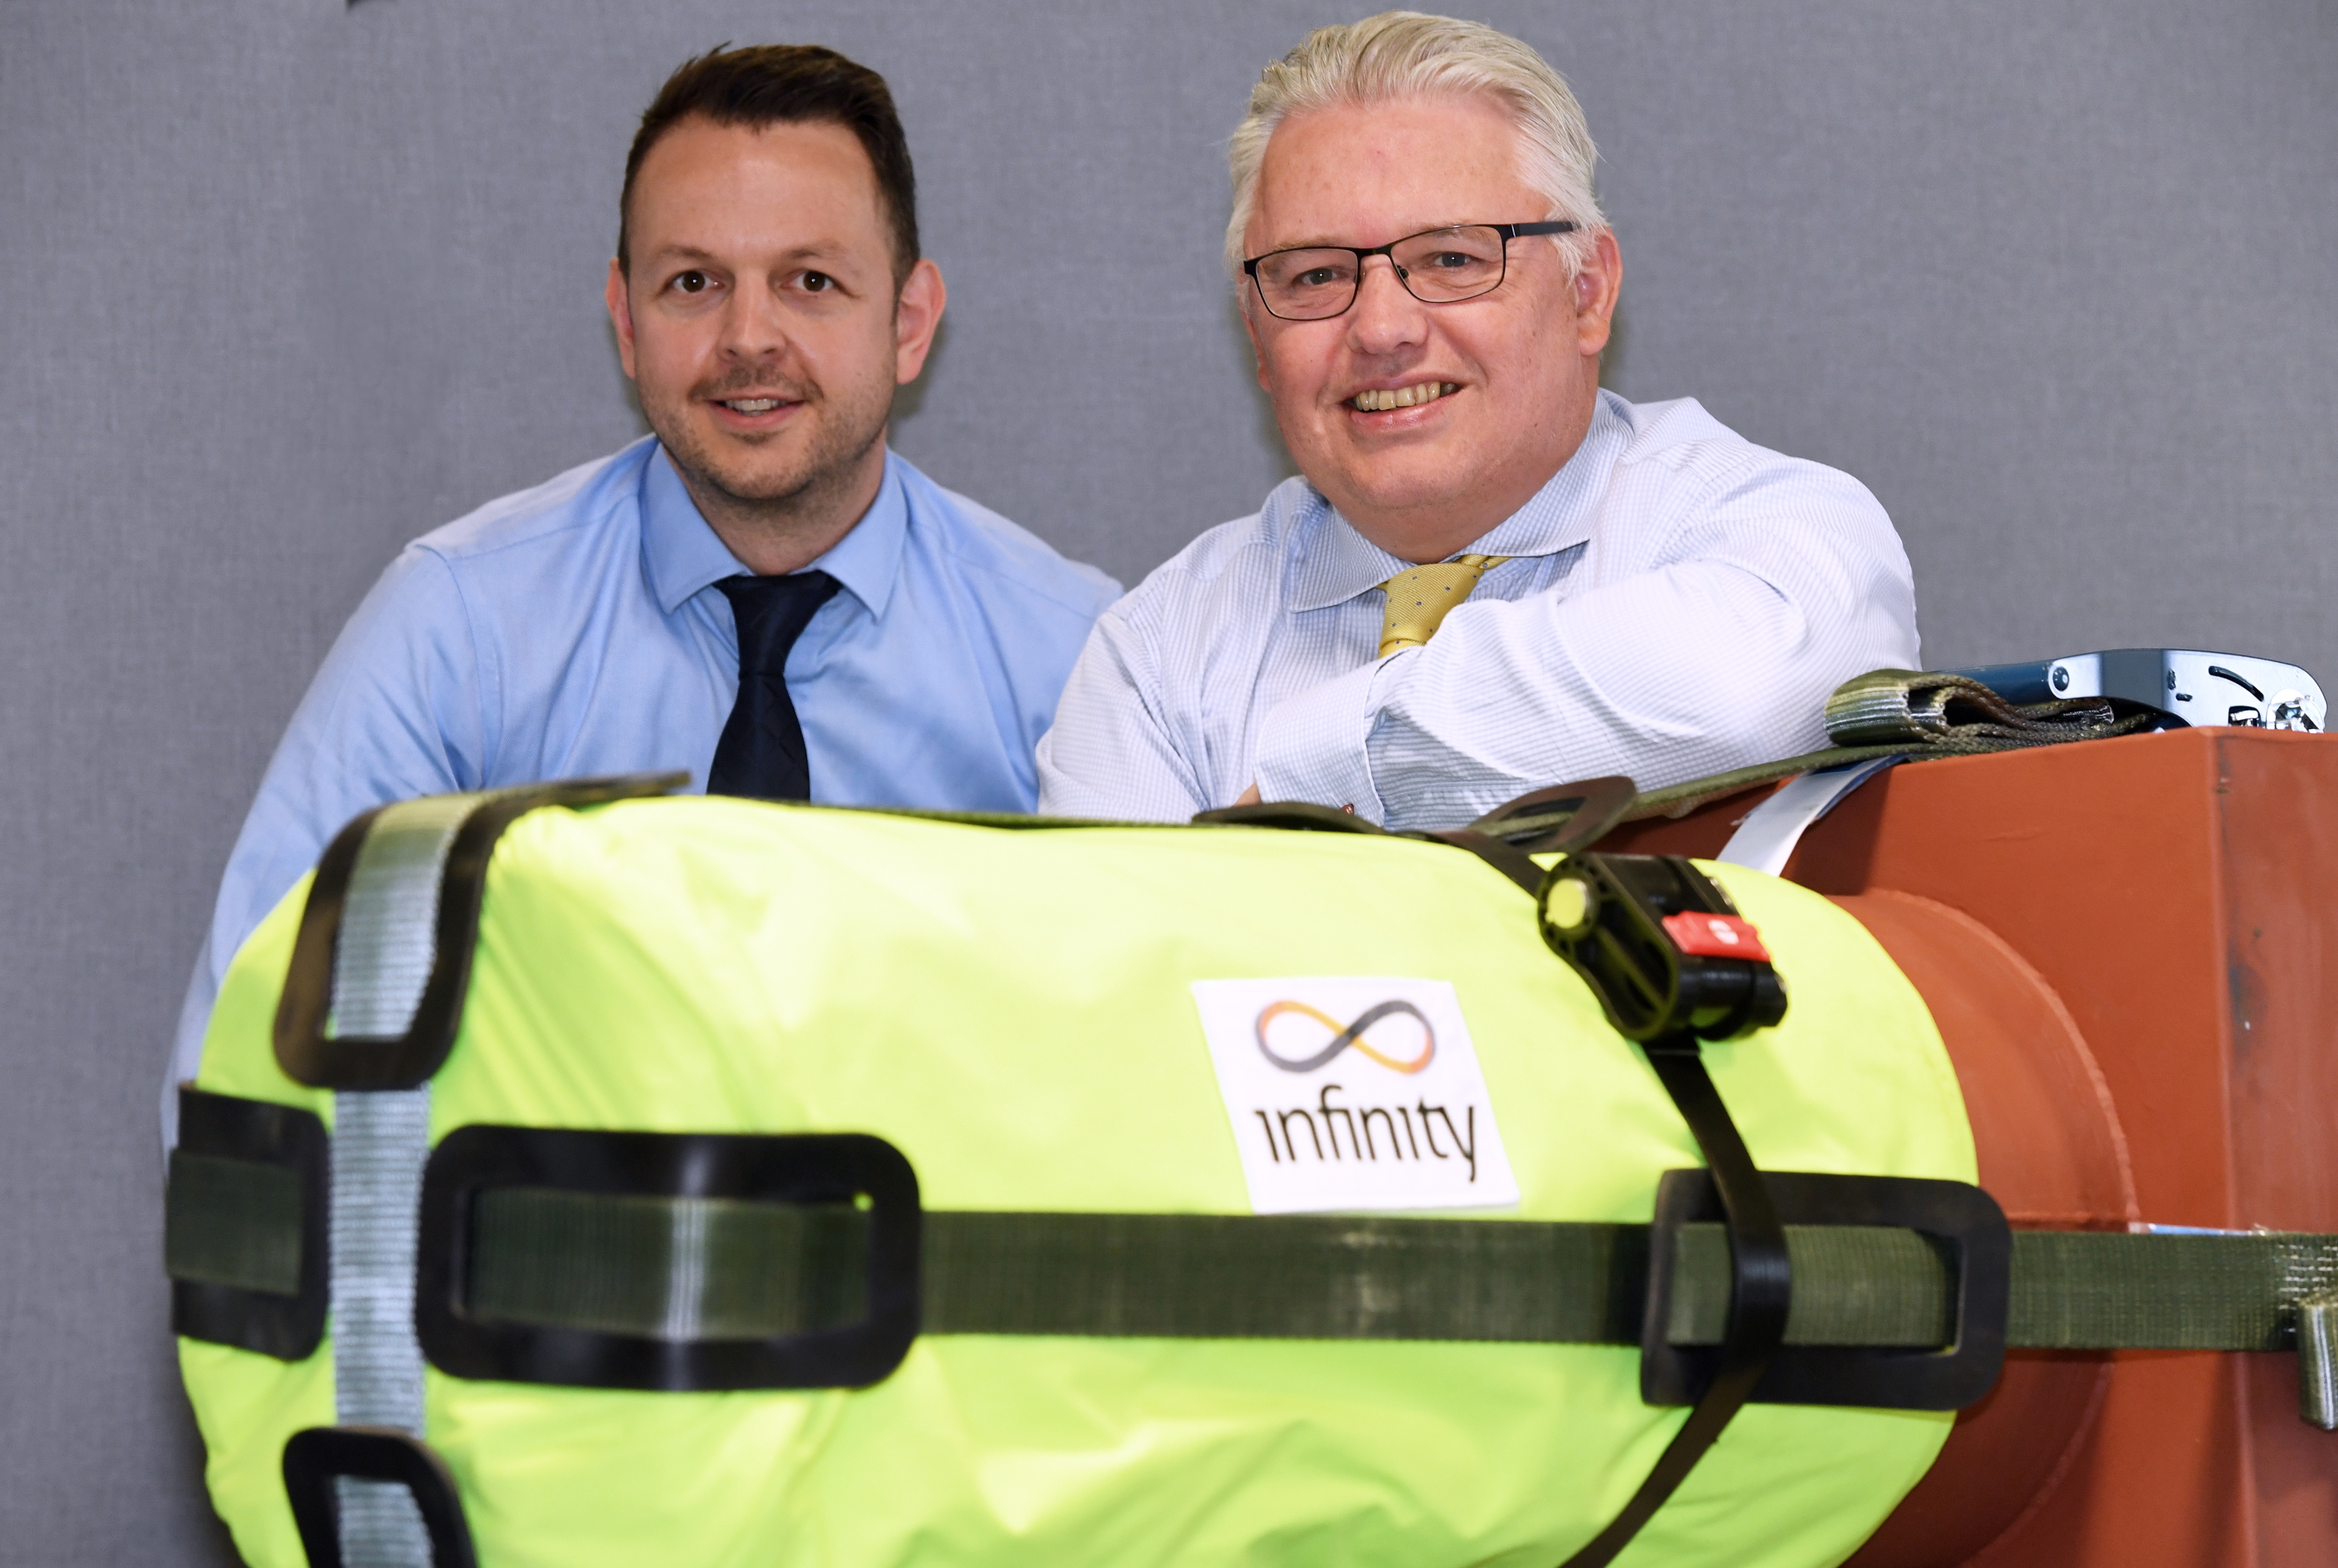 Energy Voice - EV ; 
L-R Mark Banks, Business Development Director and Project Manager and Andy McGill, MD, at Infinity with the company's Actuator Safety Gauntlet.